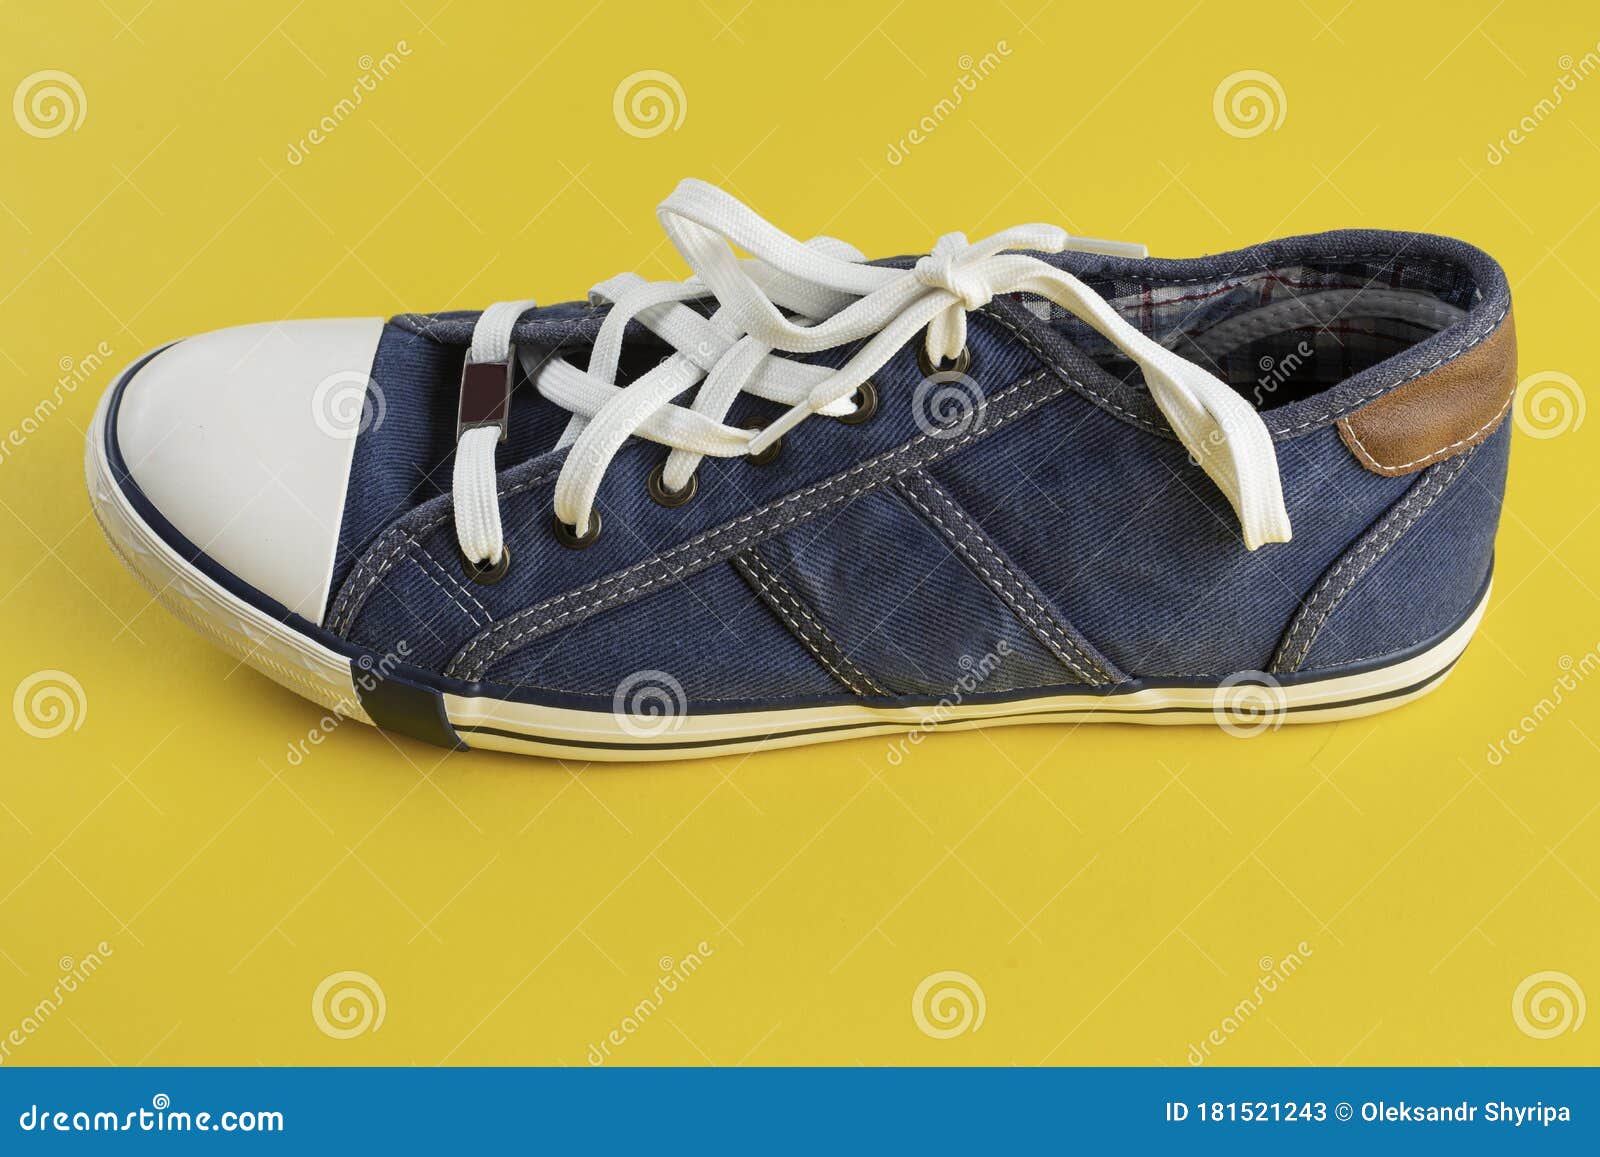 Stylish Sneaker on a Yellow Background. Youth Shoes Stock Image - Image ...